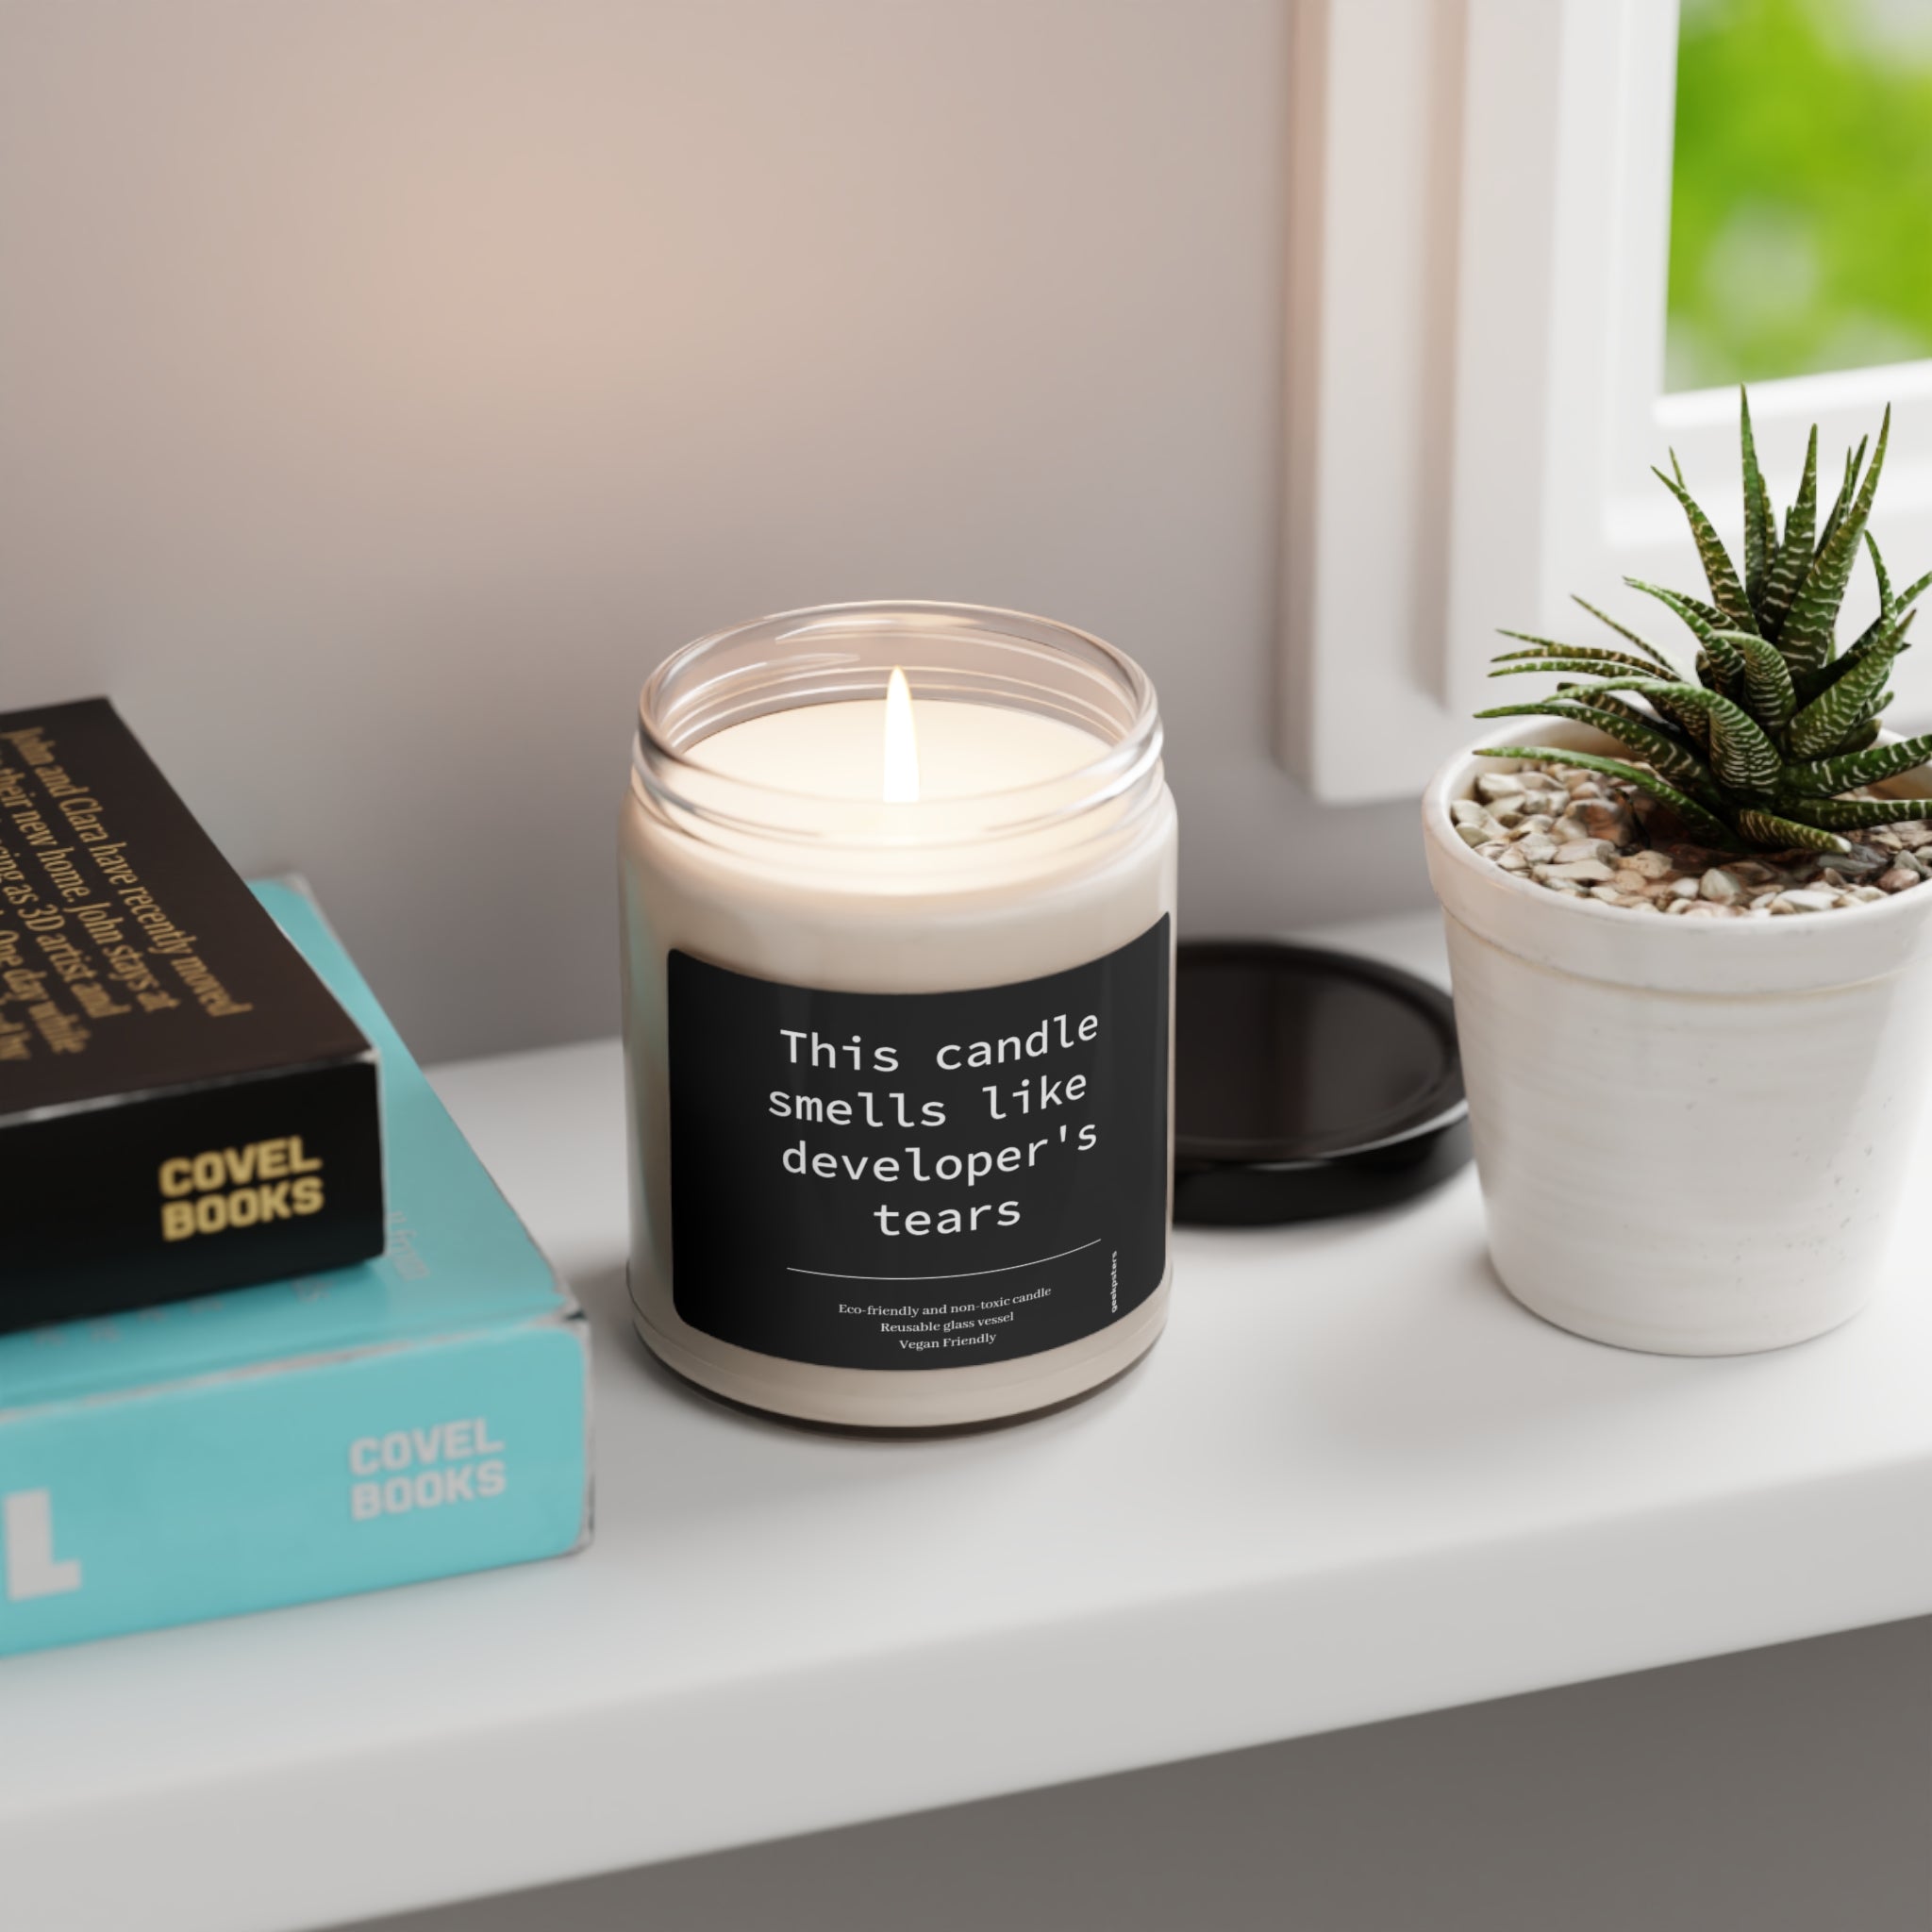 A lit scented This Candle Smells Like Developer's Tears- Scented Soy Candle, 9oz, made from a natural soy wax blend, on a window sill next to books and a potted plant.